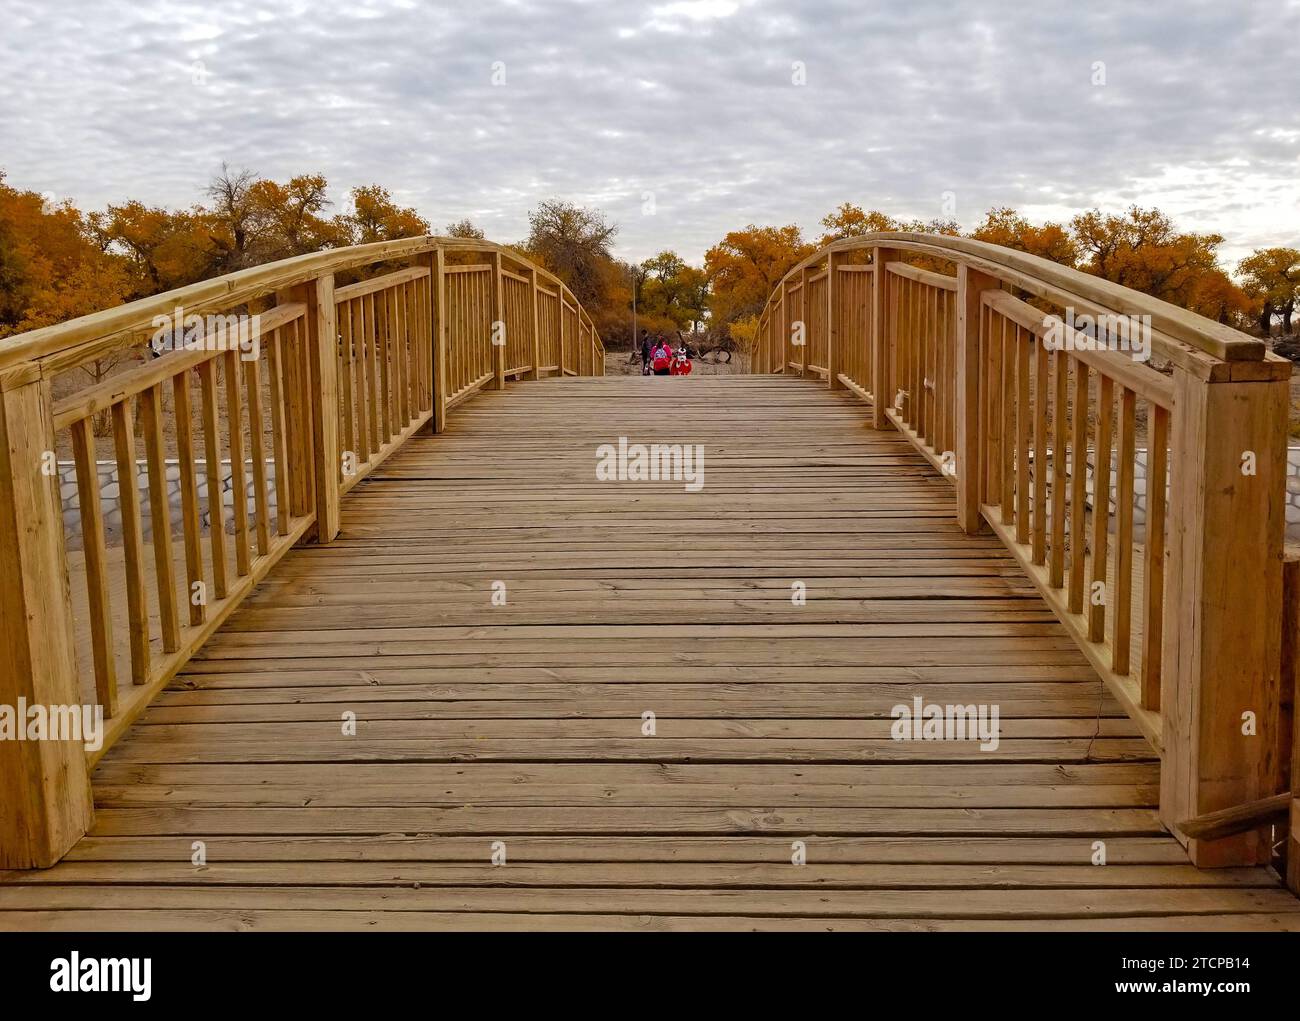 Wooden bridge with desert poplar, also known as Populus euphratica, trees on the other side, in an Inner Mongolian desert, on a cloudy autumn day -16 Stock Photo